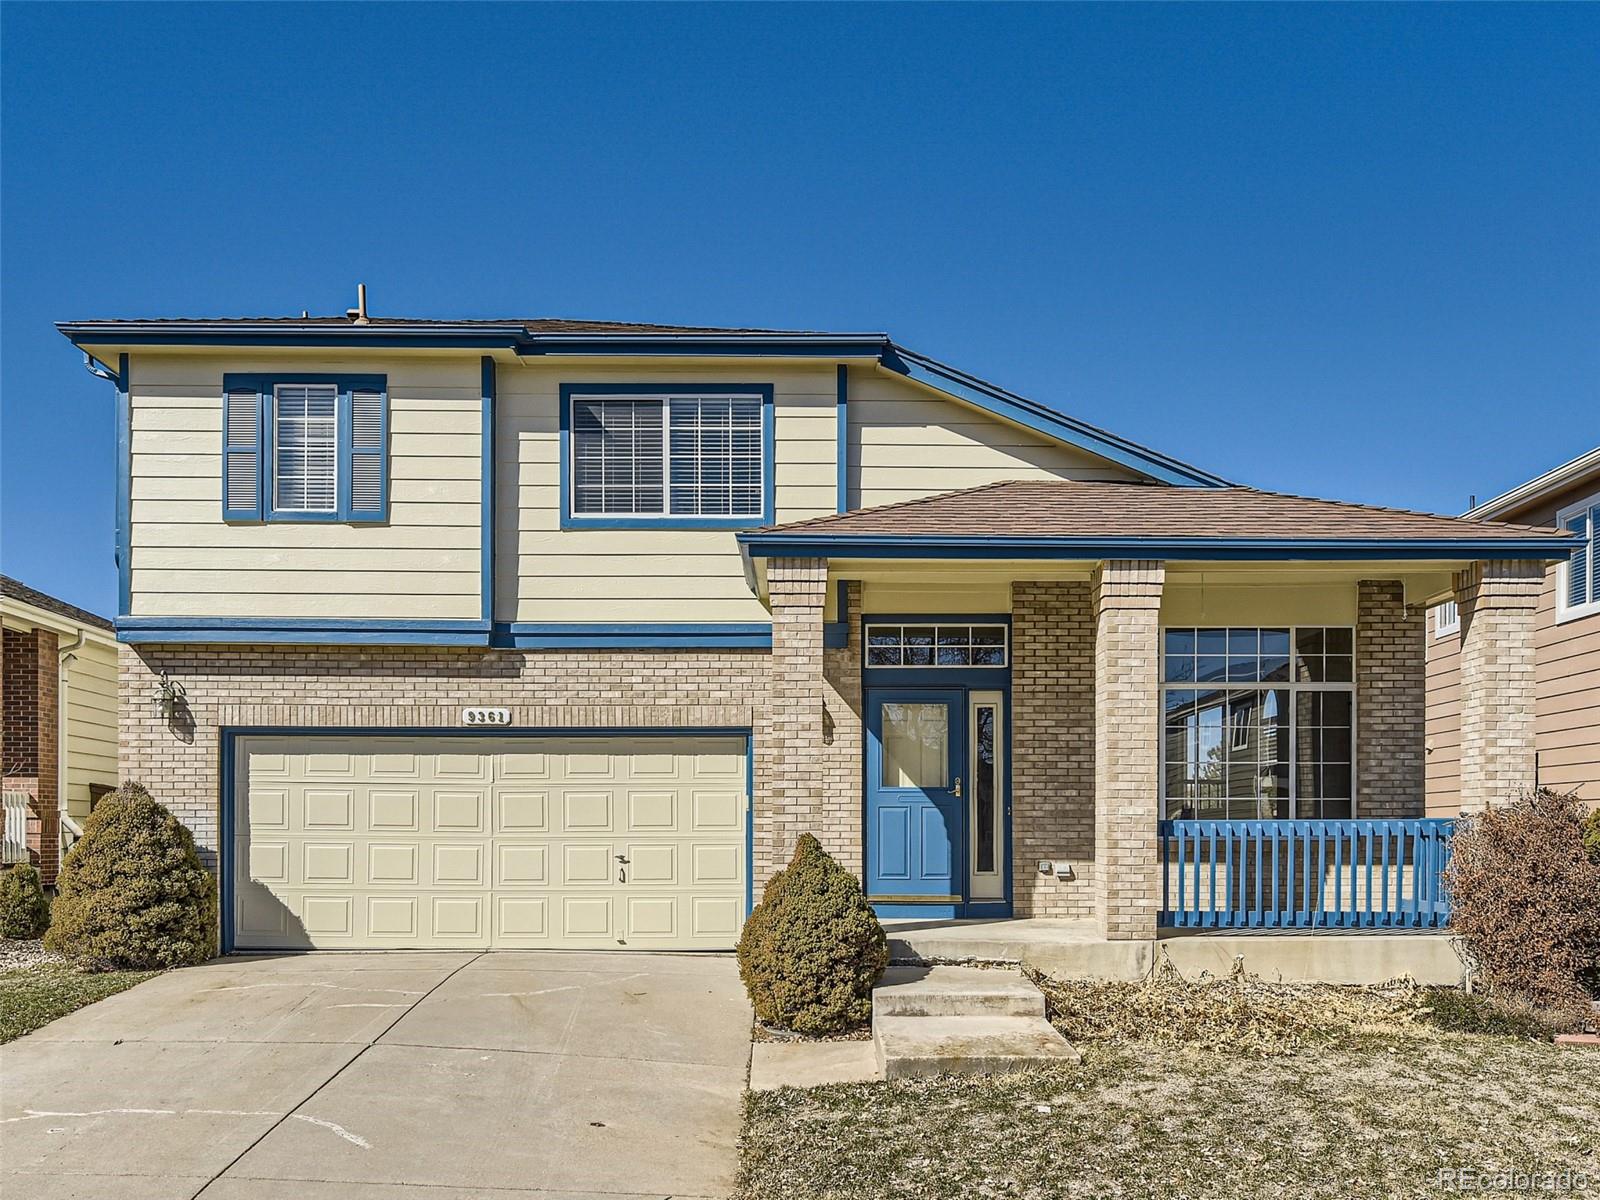 Report Image for 9361  Morning Glory Lane,Highlands Ranch, Colorado